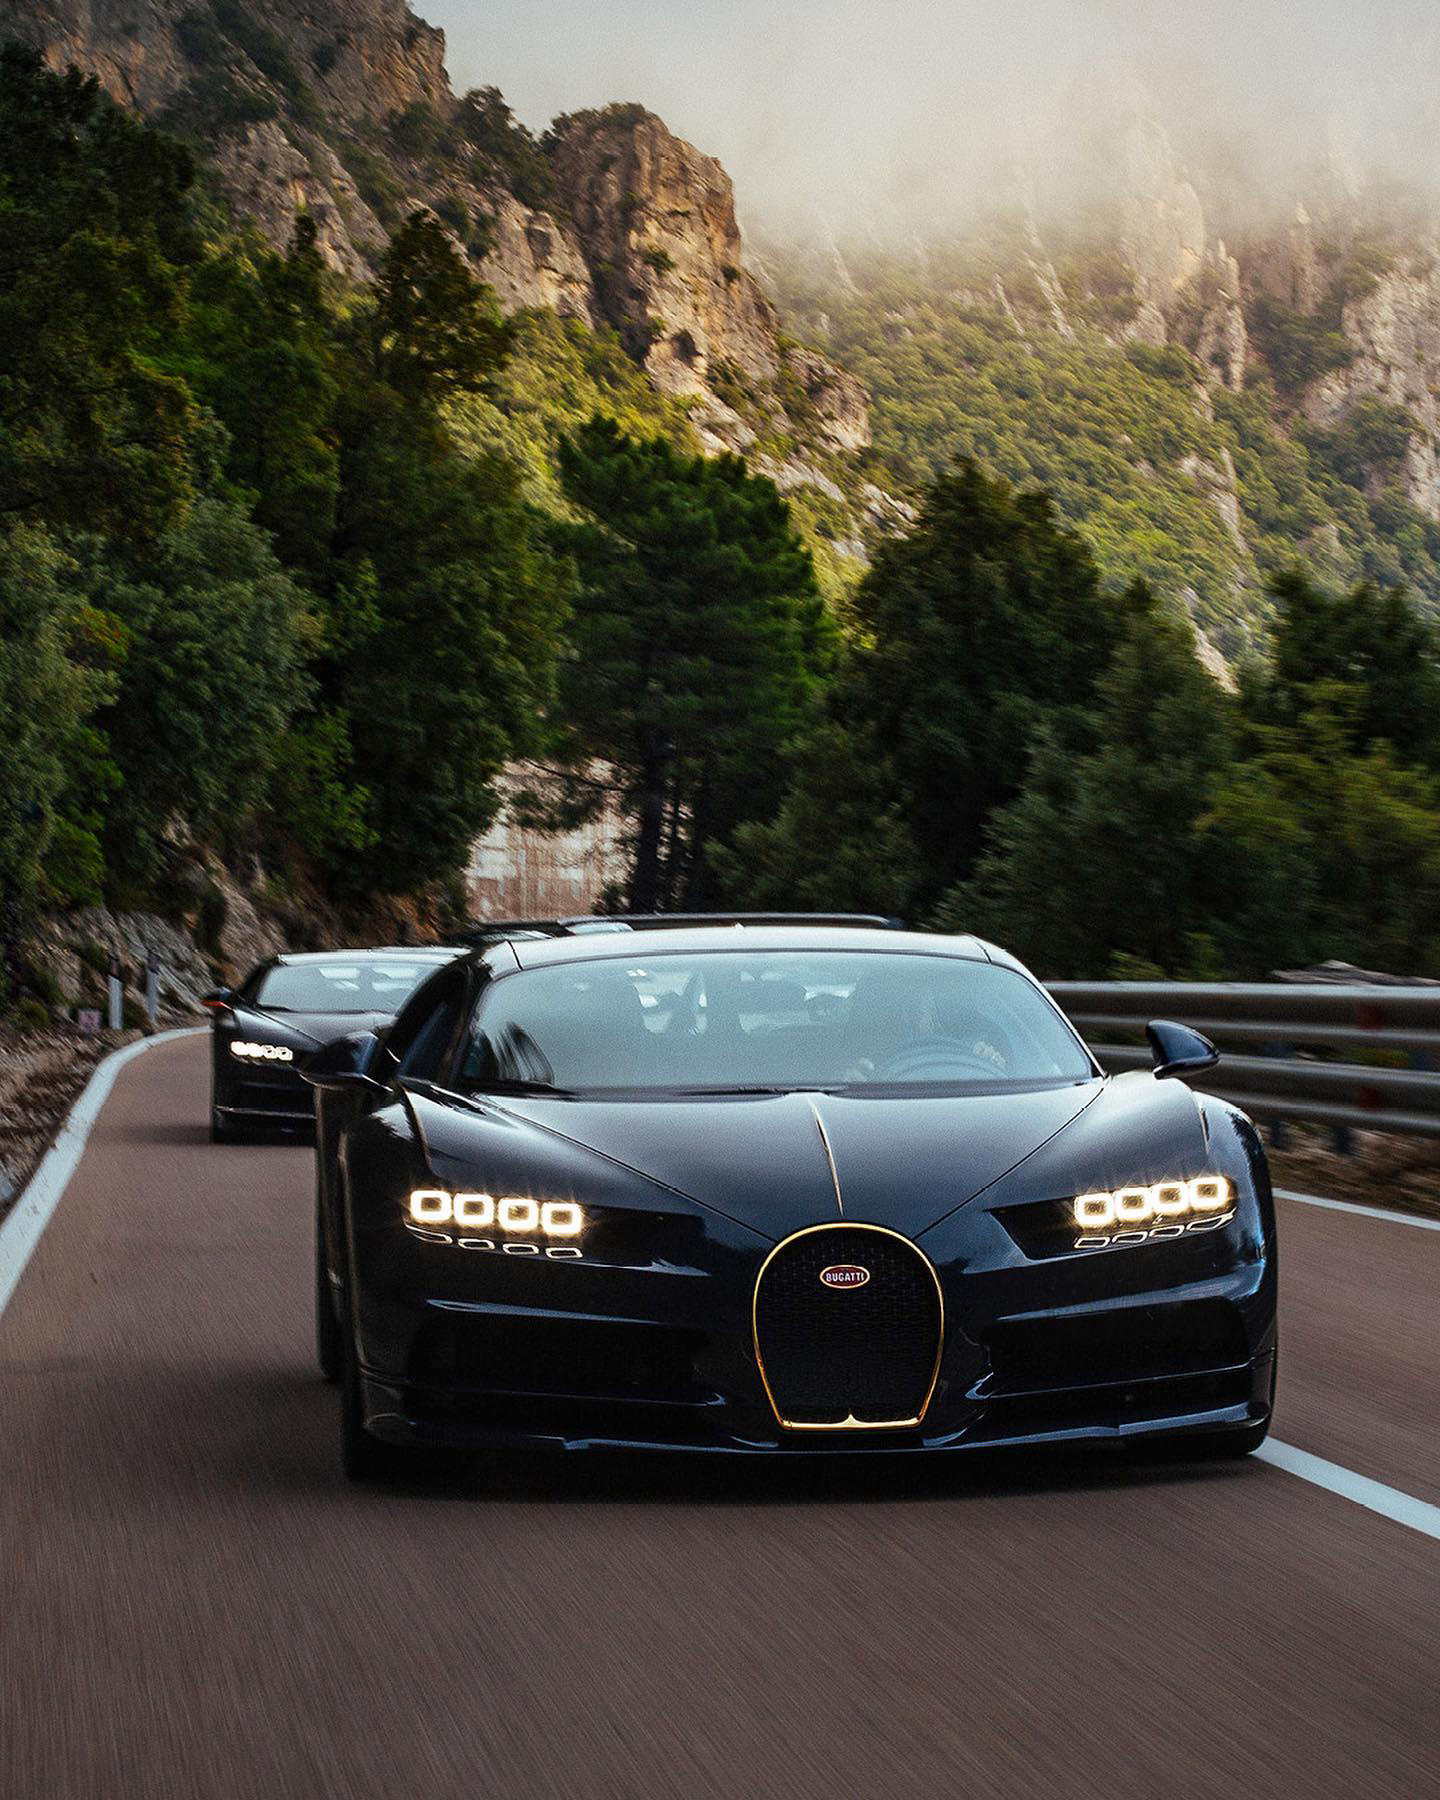 BUGATTI - Sardinia is a Mediterranean paradise of winding mountain passes that trace ancient rivers